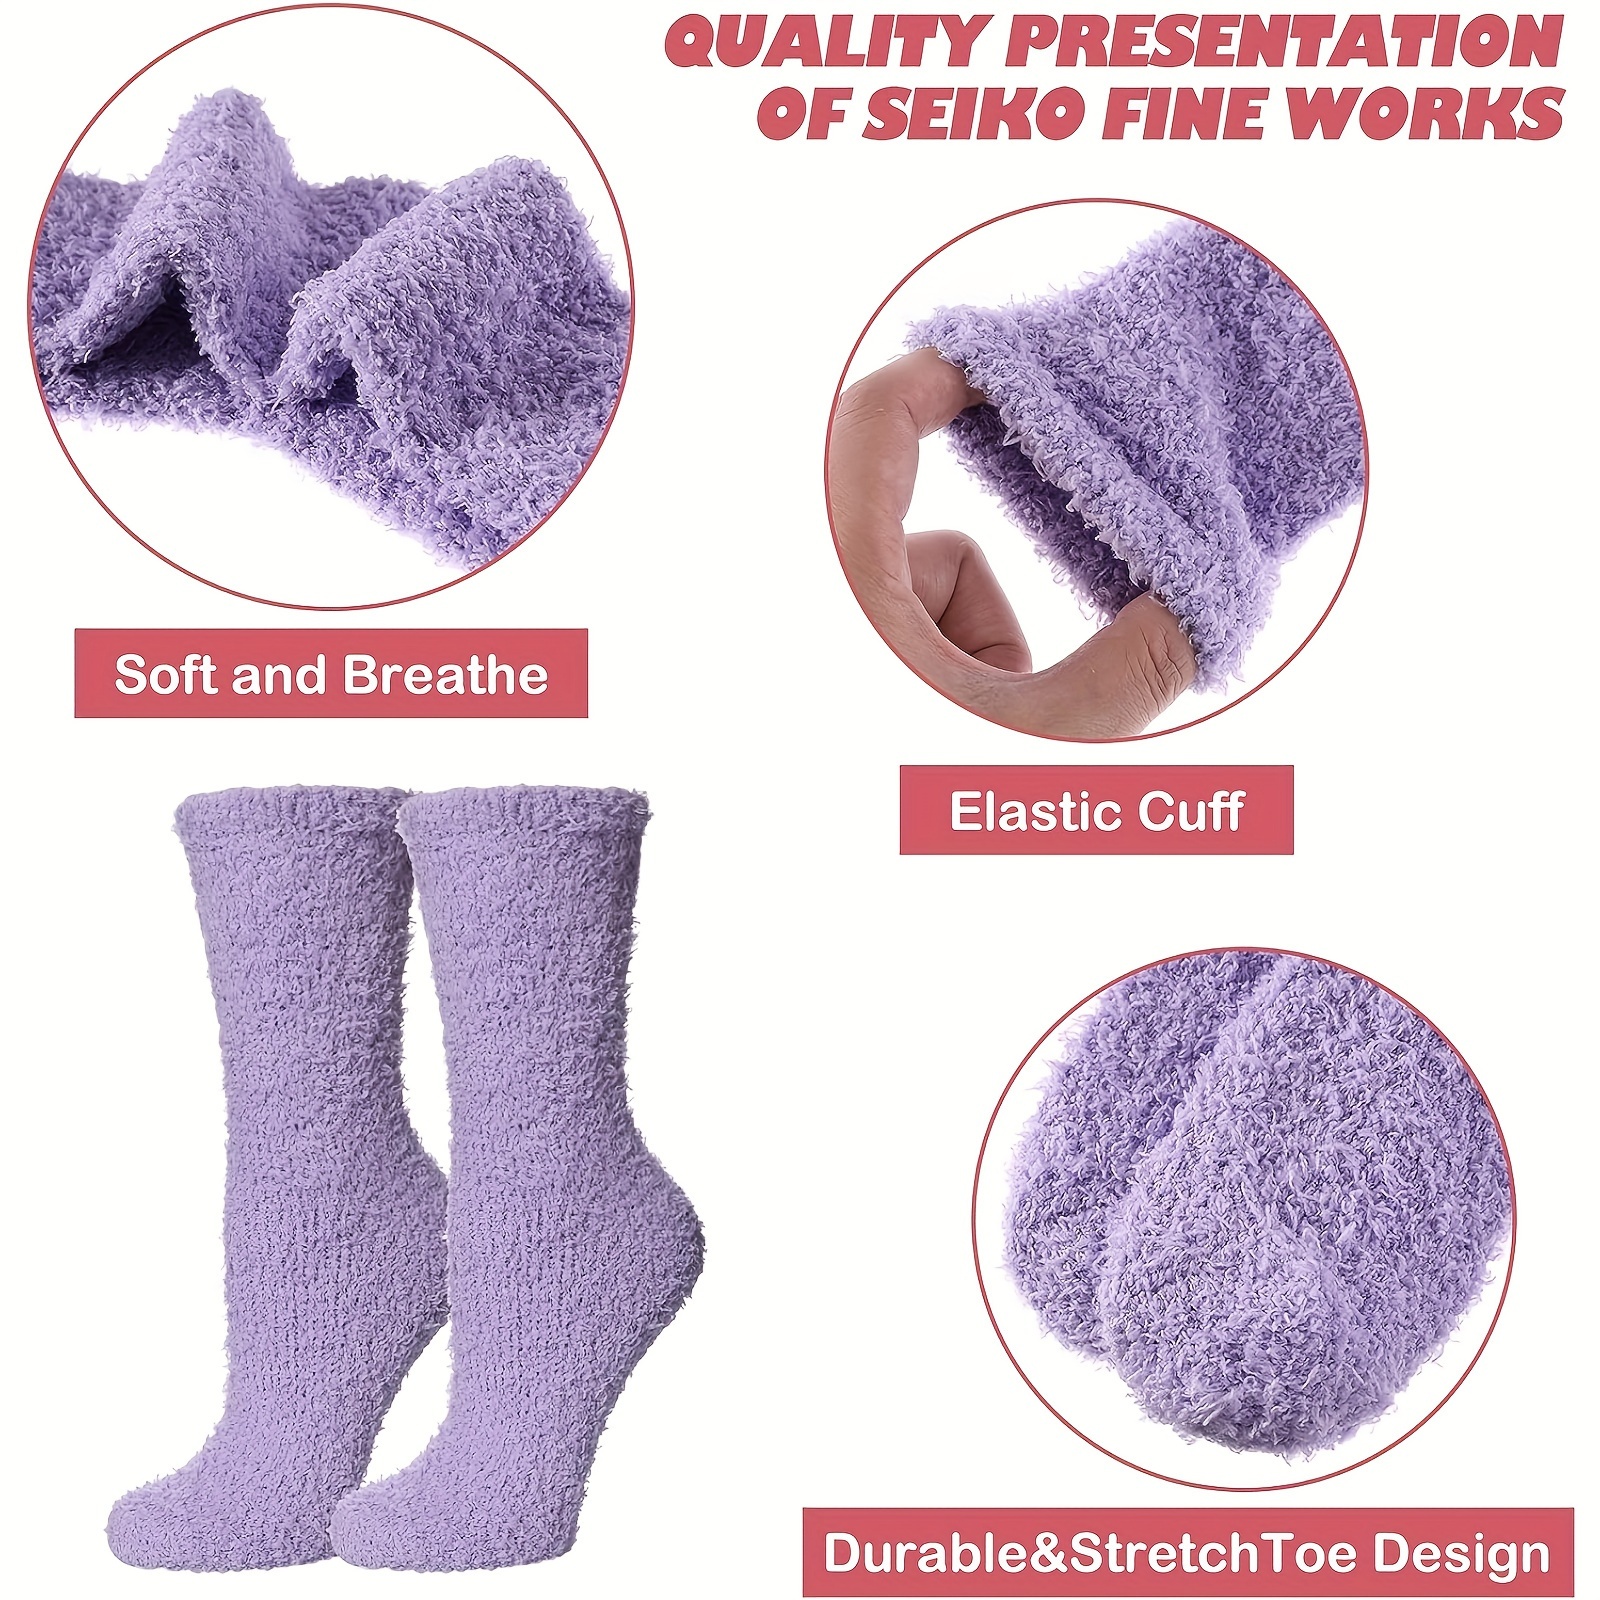 Winter Cozy Fuzzy Socks 5 Pairs - Microfiber Soft Touch, Super Comfy~ Winter